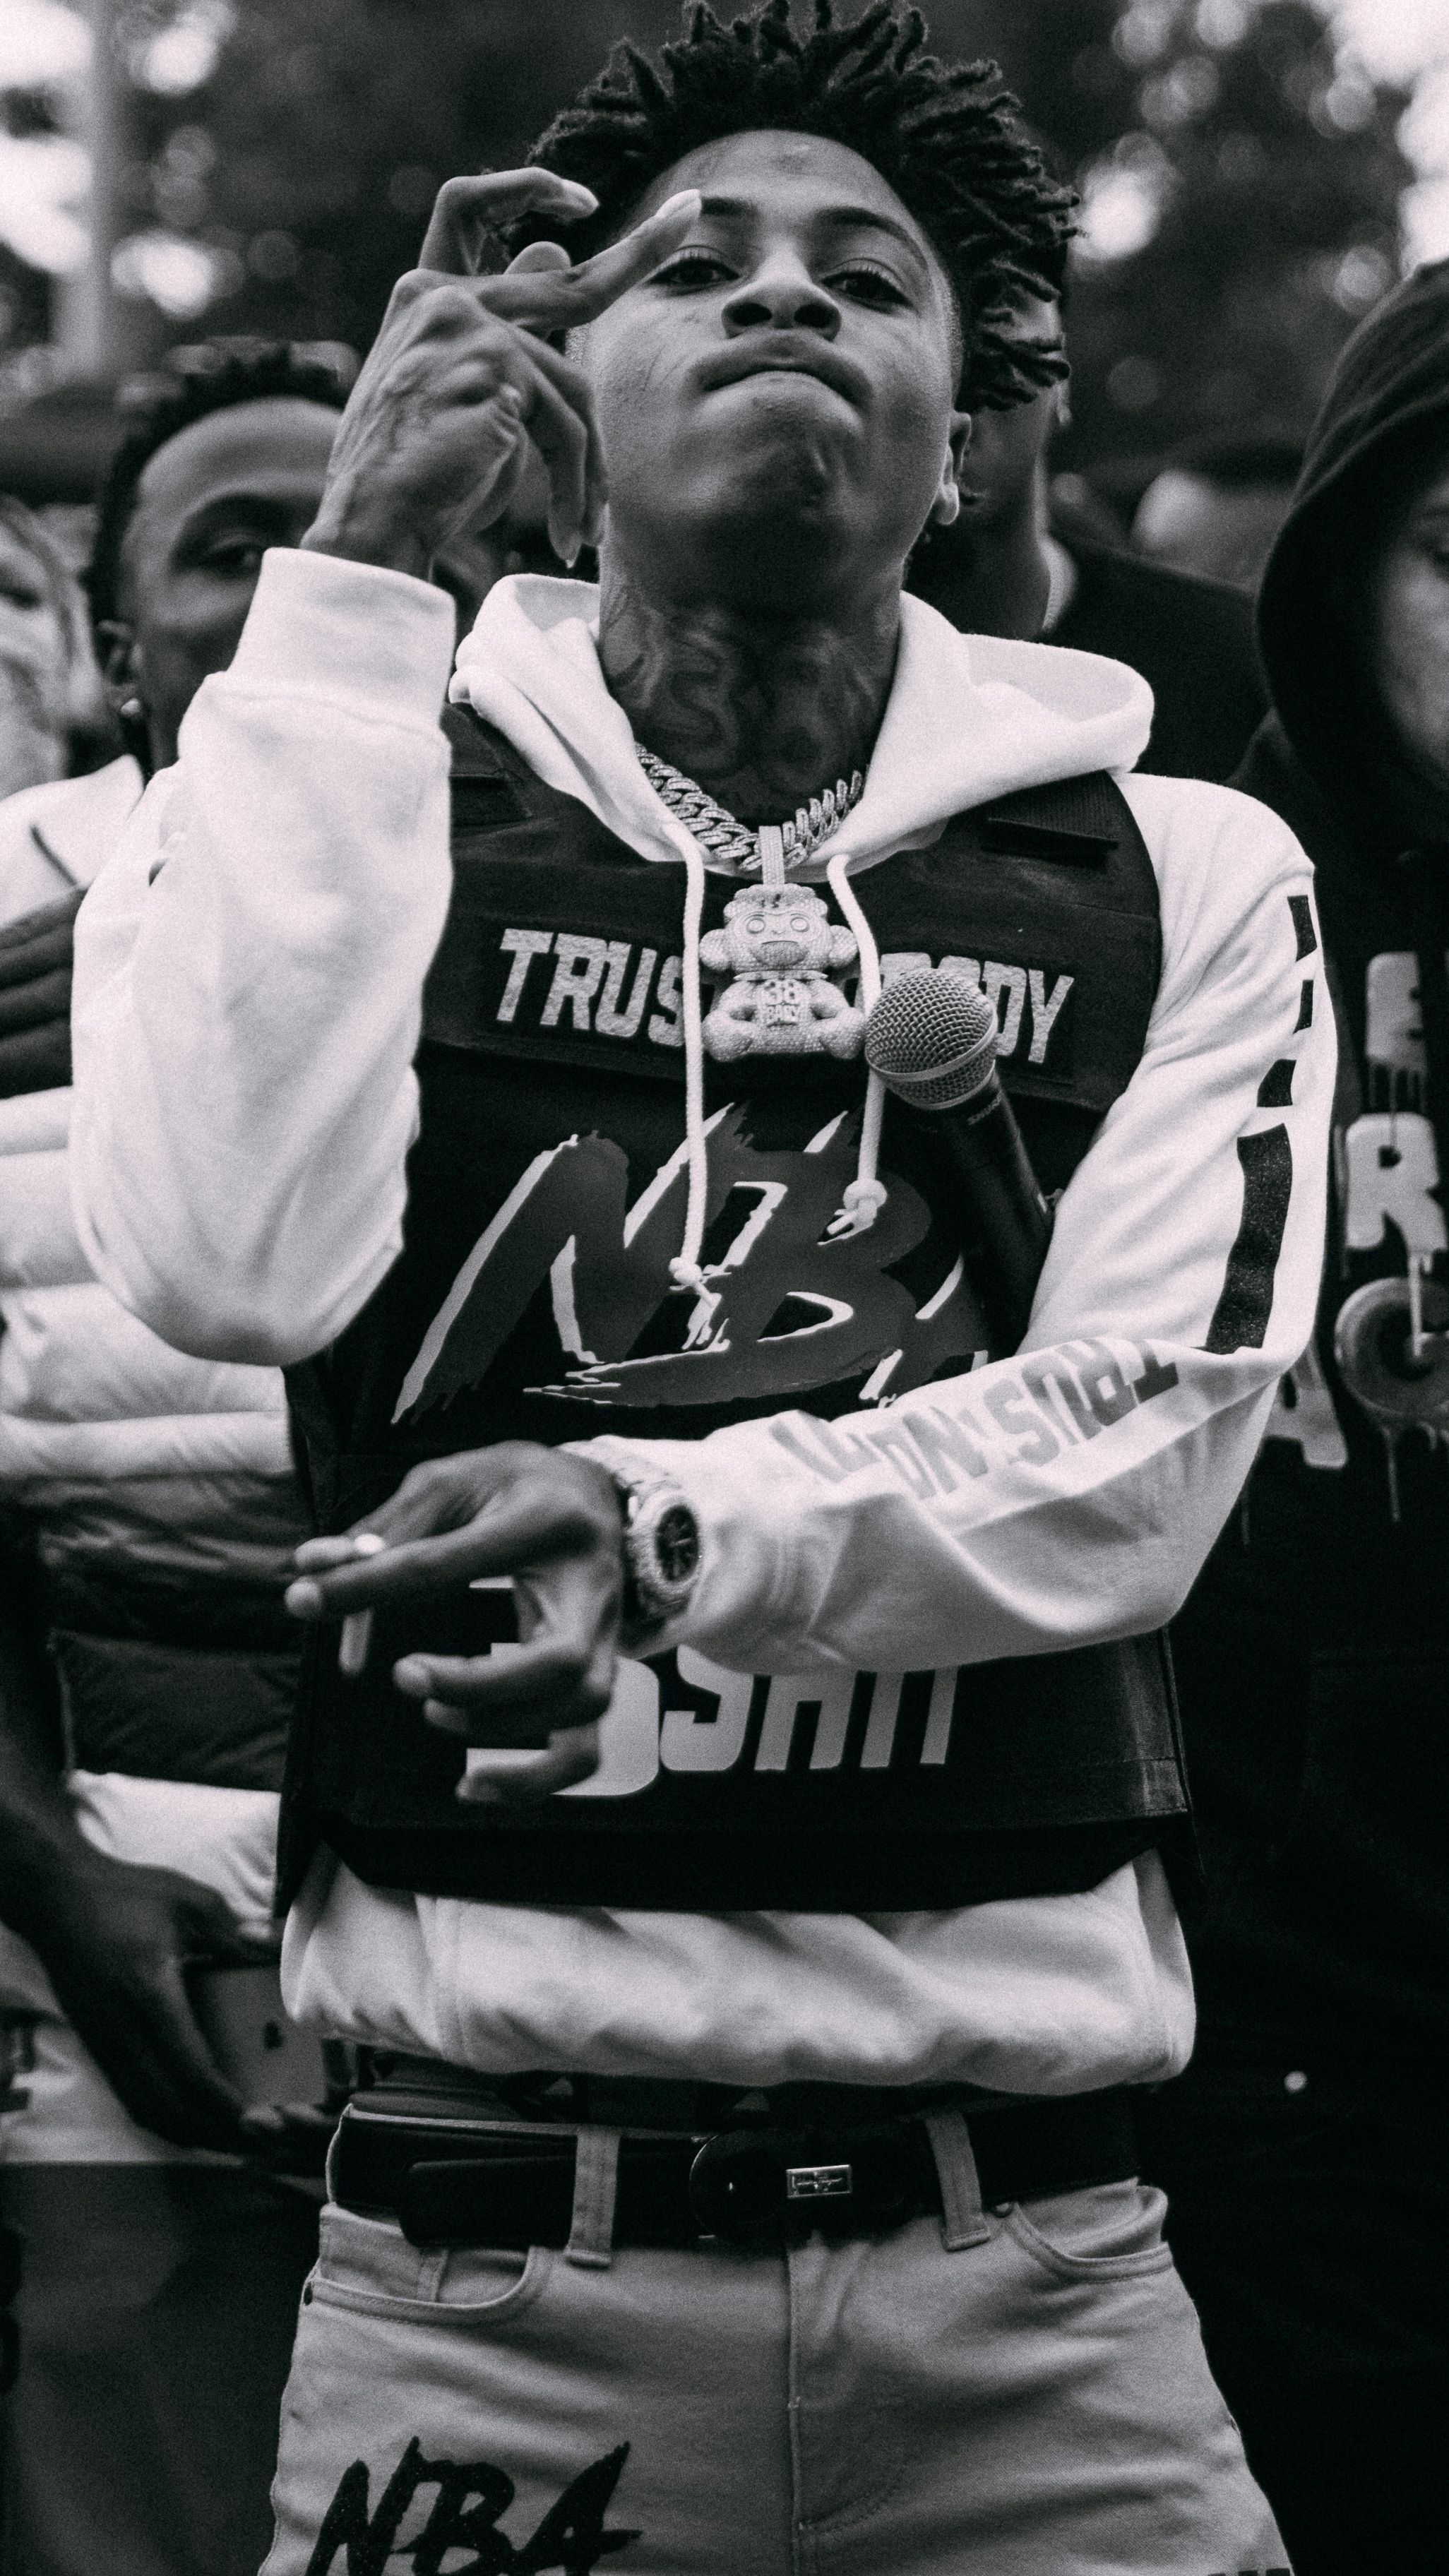 Free download NBA Youngboy in 2020 Cute rappers Nba outfit Rapper style [2052x3648] for your Desktop, Mobile & Tablet. Explore NBA YoungBoy 2020 Wallpaper. NBA Live Wallpaper, NBA Wallpaper, NBA Wallpaper